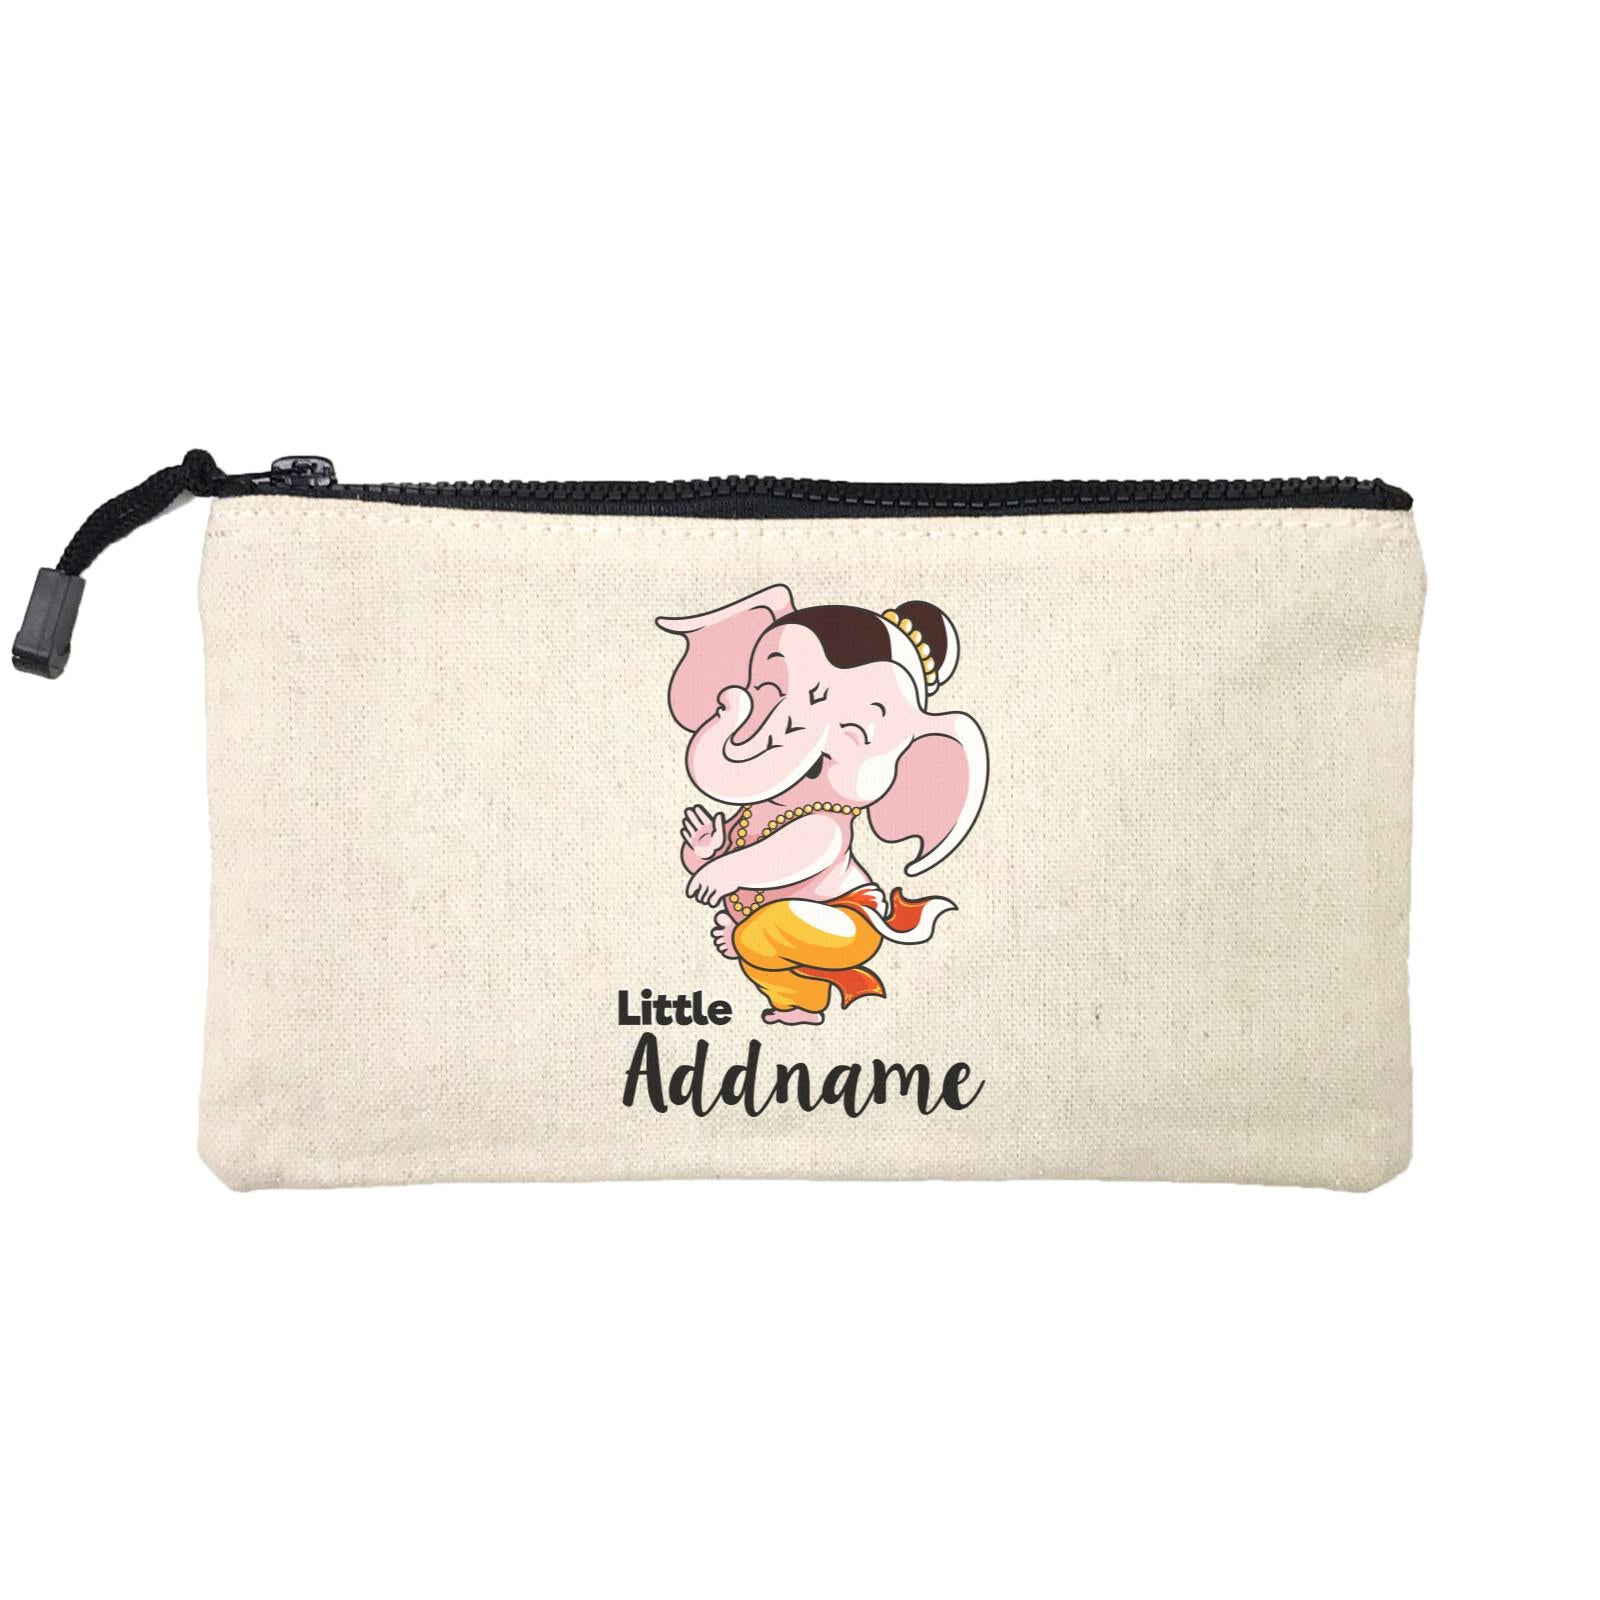 Cute Dancing Ganesha Little Addname Mini Accessories Stationery Pouch